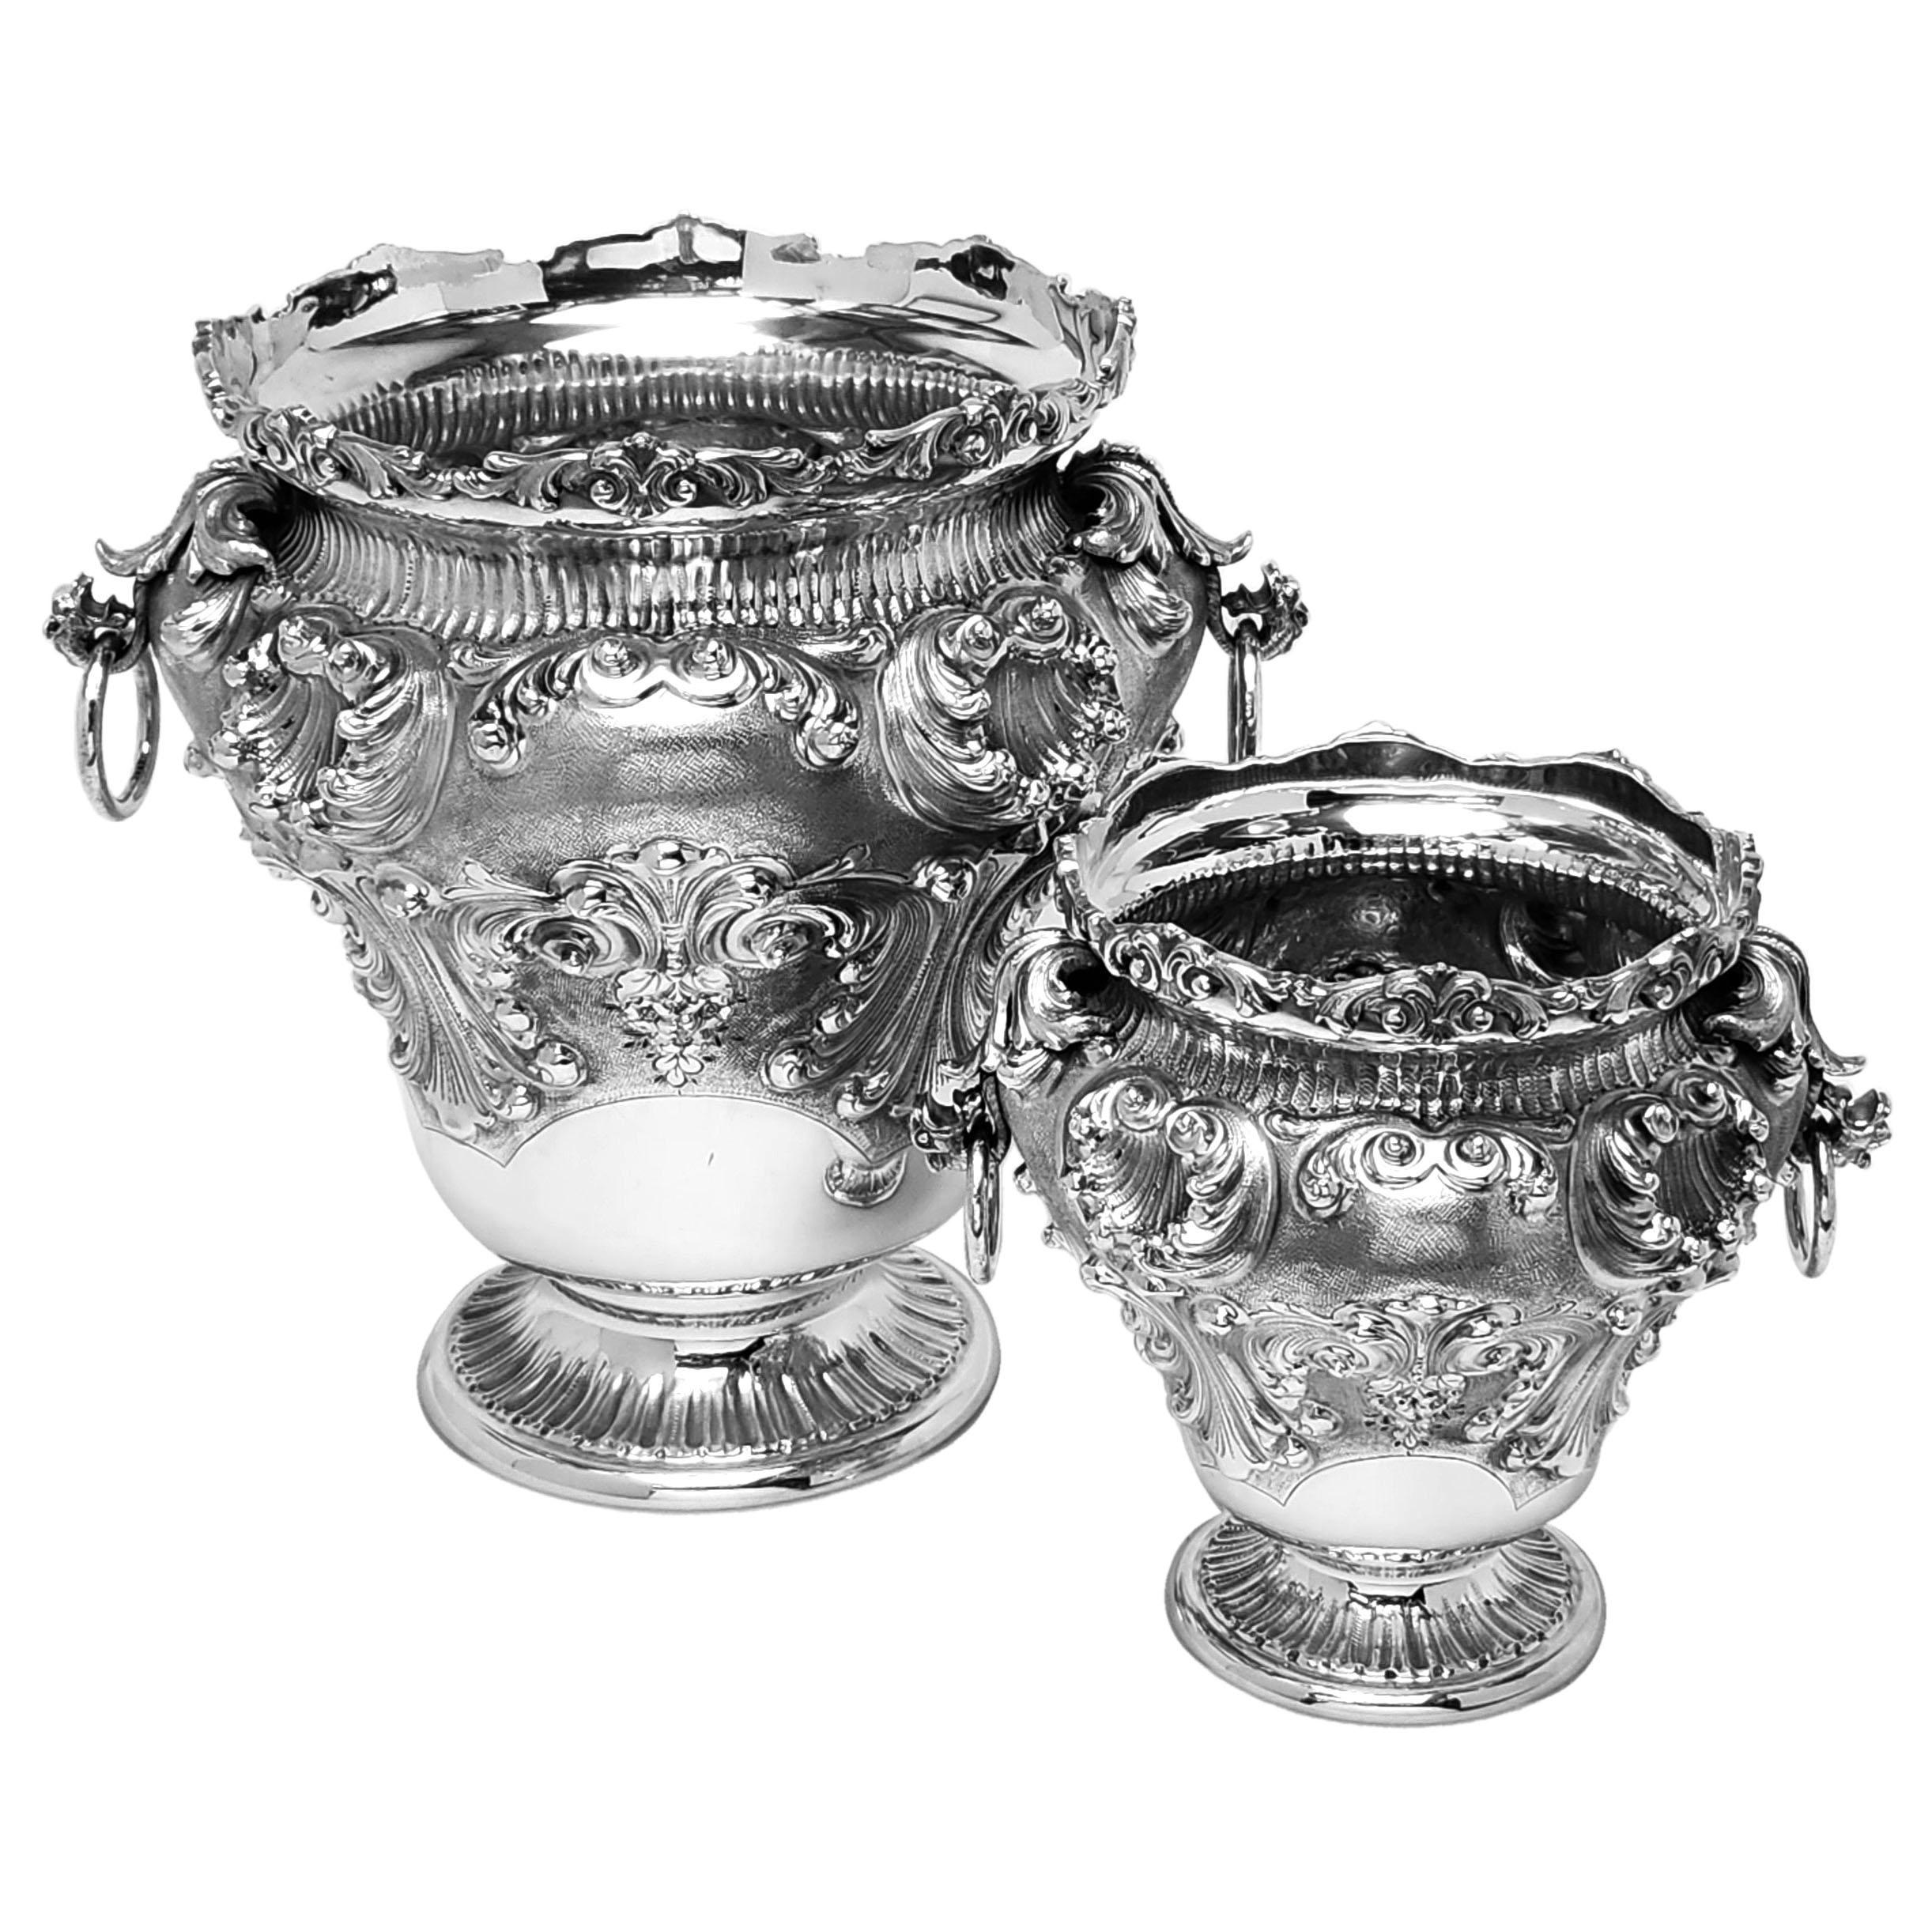 An elegant Italian Solid Silver Set comprising of a Champagne / Wine Cooler and a matching Ice Bucket. The Set has a chased Rococo inspired Design and each has a pair of ring handles.  Each Cooler stands on a spread pedestal foot.

Made in Italy in